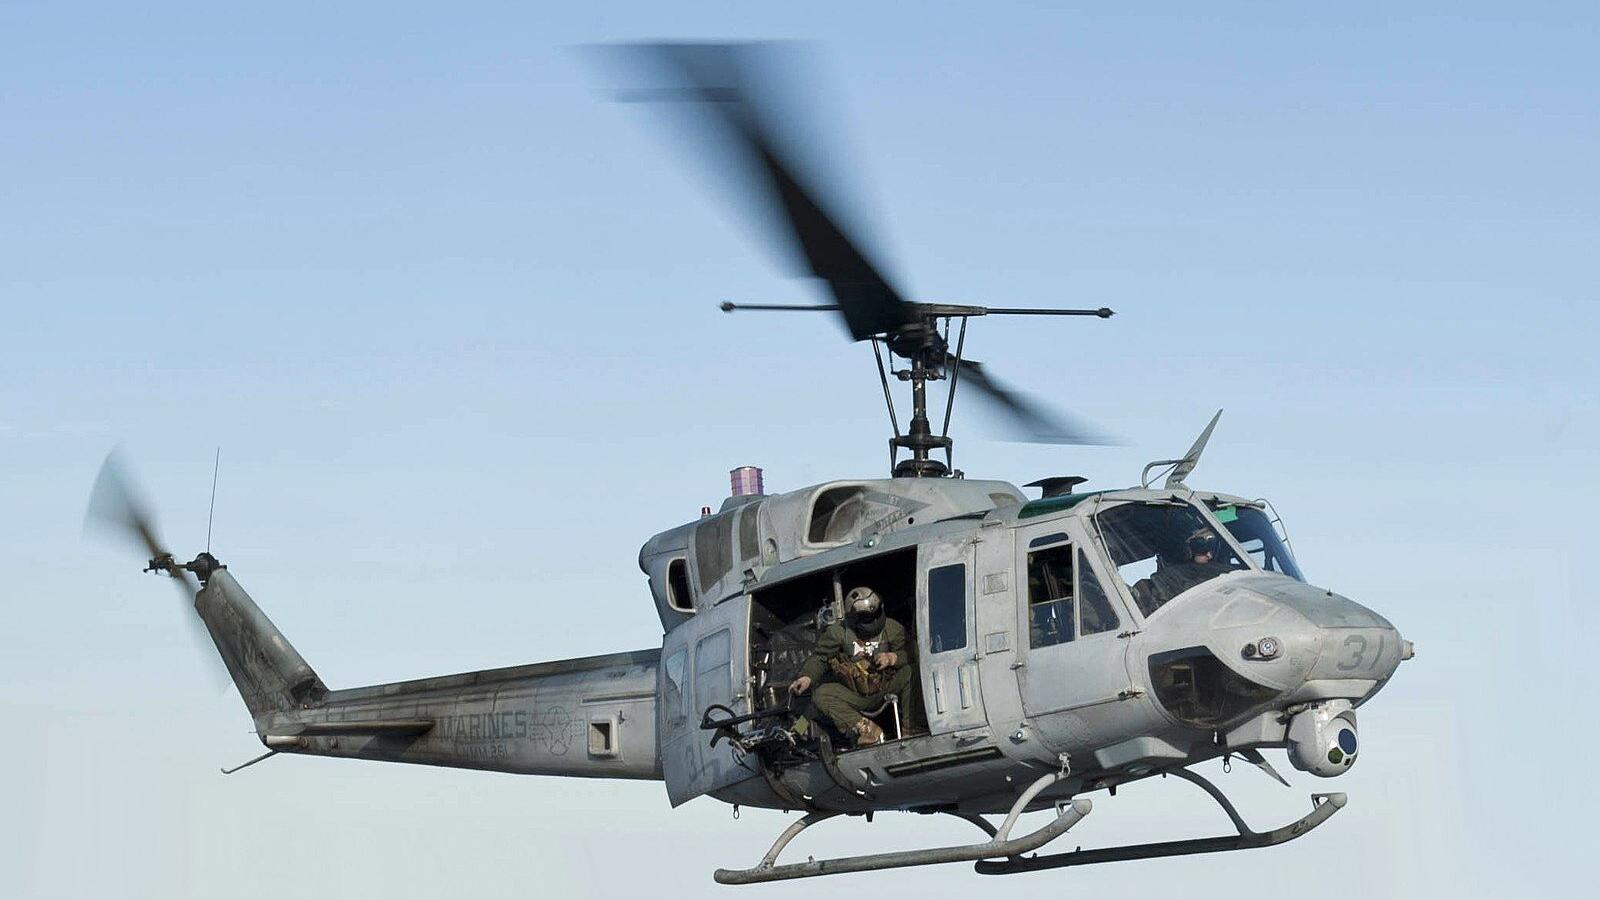 FBI investigates shooting of military helicopter in Virginia